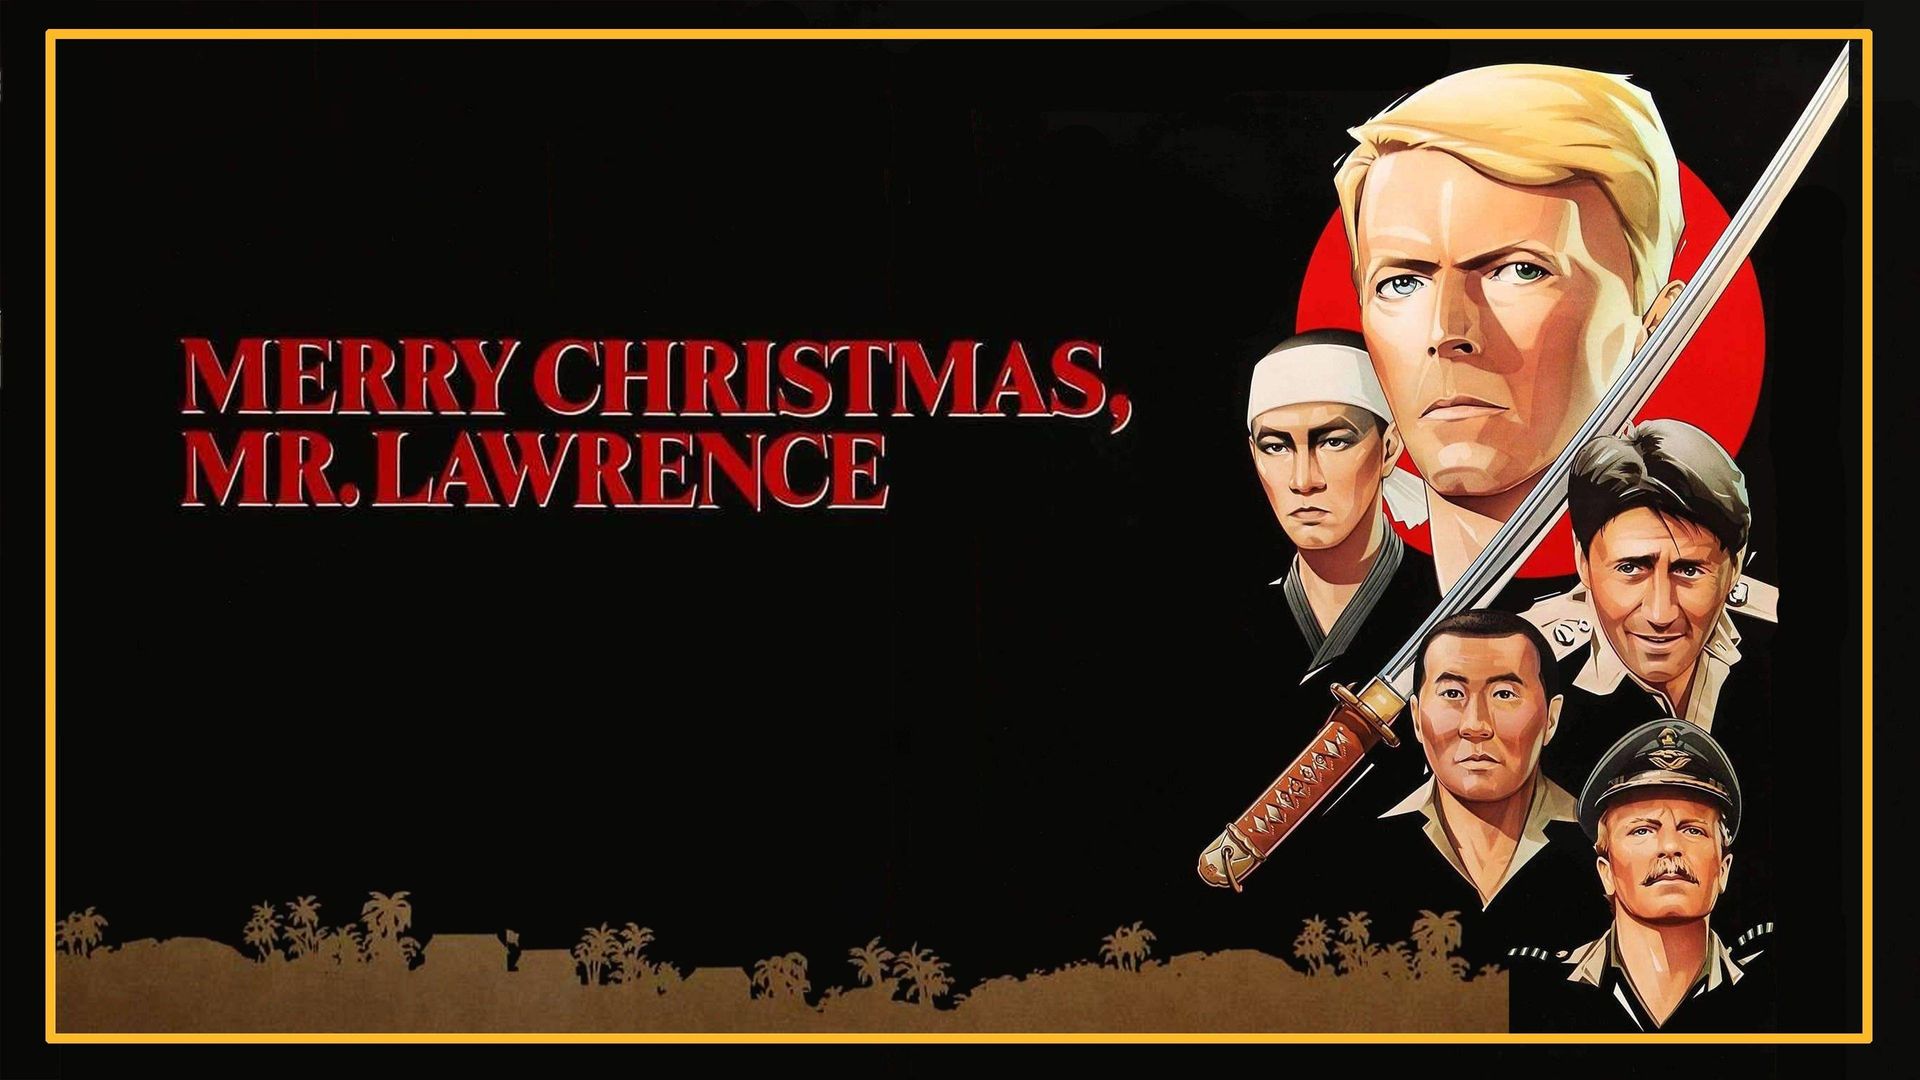 Merry Christmas Mr. Lawrence Backdrop